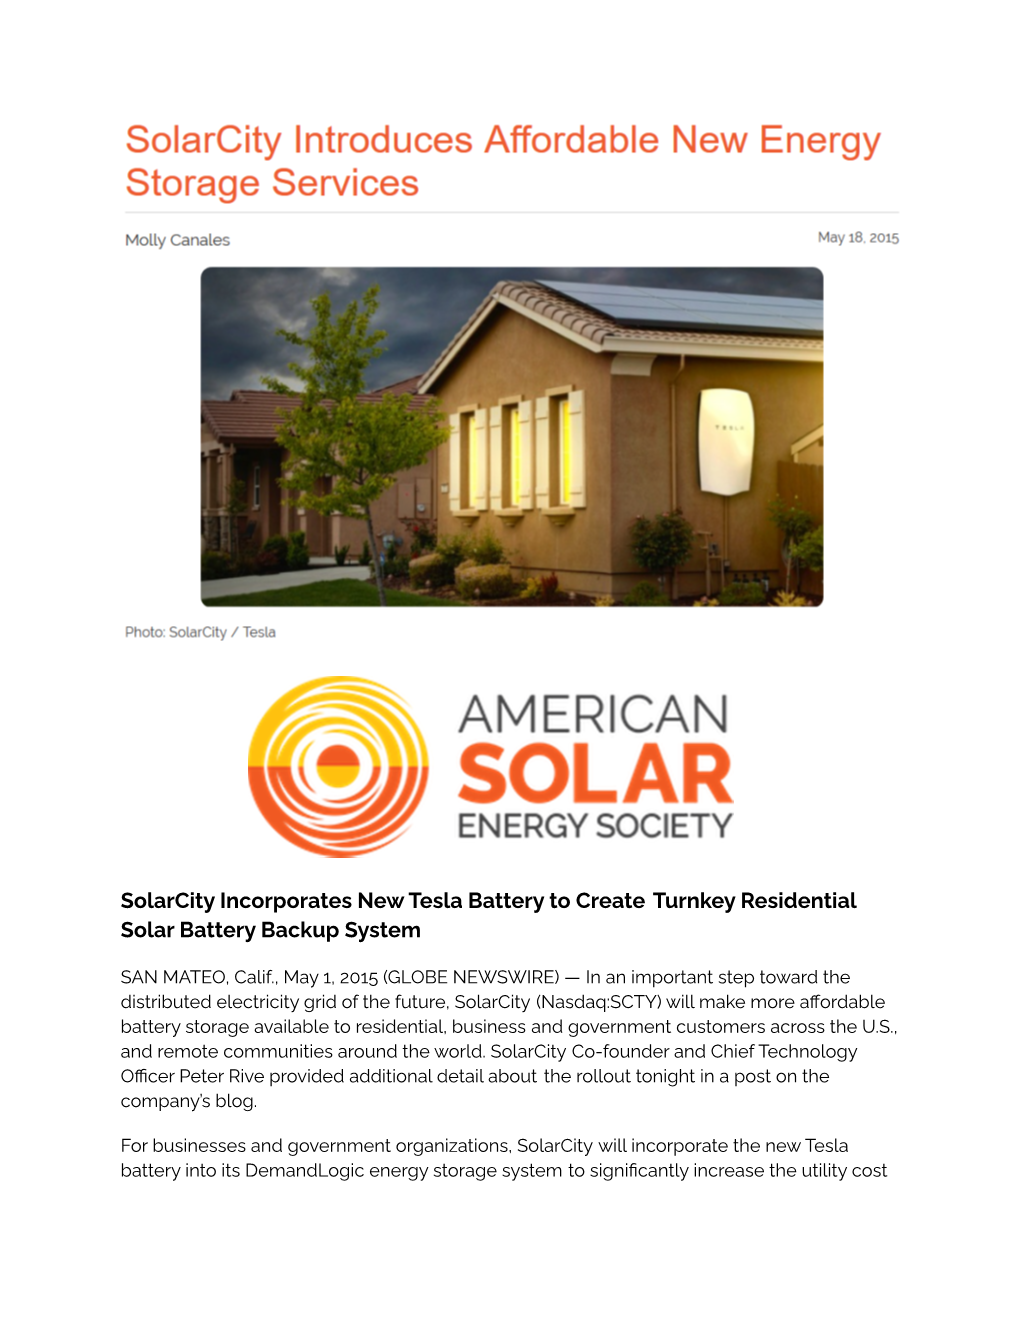 Solarcity Introduces Affordable New Energy Storage Services